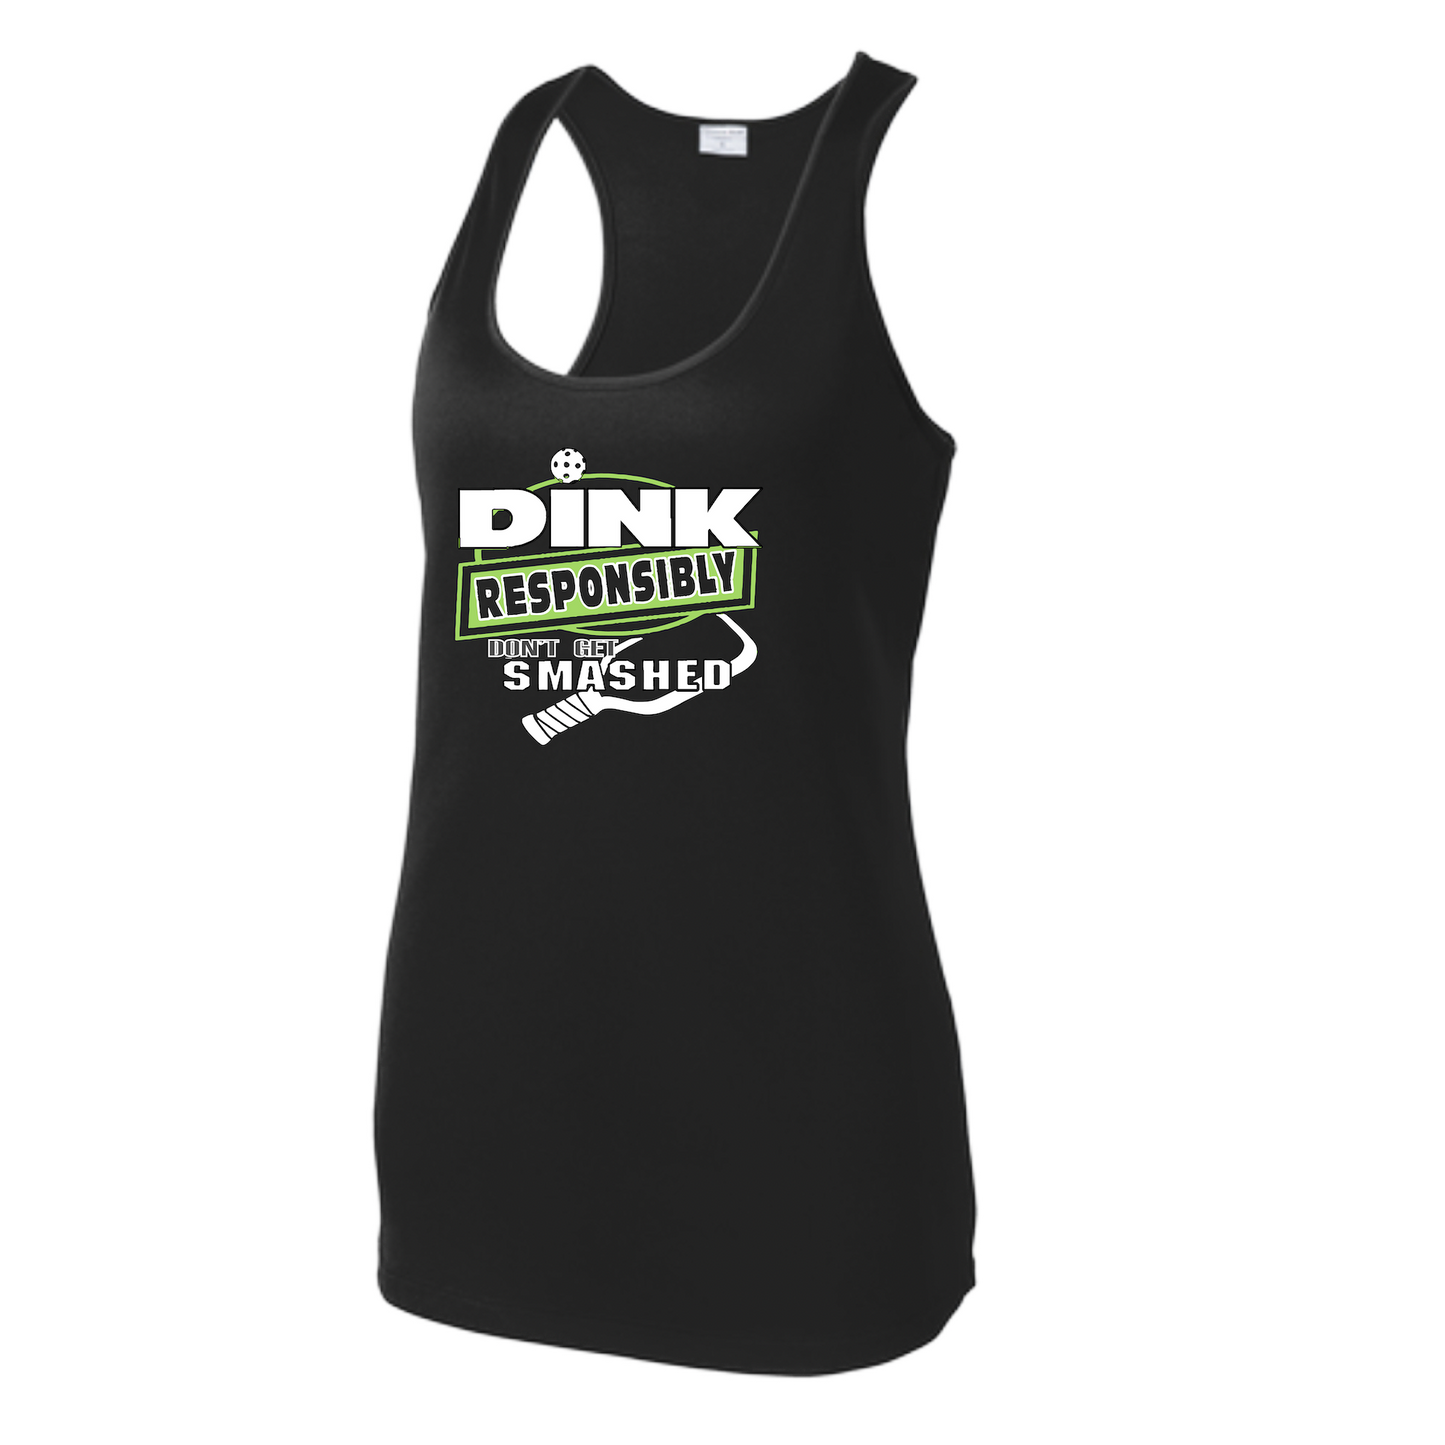 Pickleball Design: Dink Responsibly - Don't Get Smashed  Women's Style: Racerback Tank  Turn up the volume in this Women's shirt with its perfect mix of softness and attitude. Material is ultra-comfortable with moisture wicking properties and tri-blend softness. PosiCharge technology locks in color. Highly breathable and lightweight.